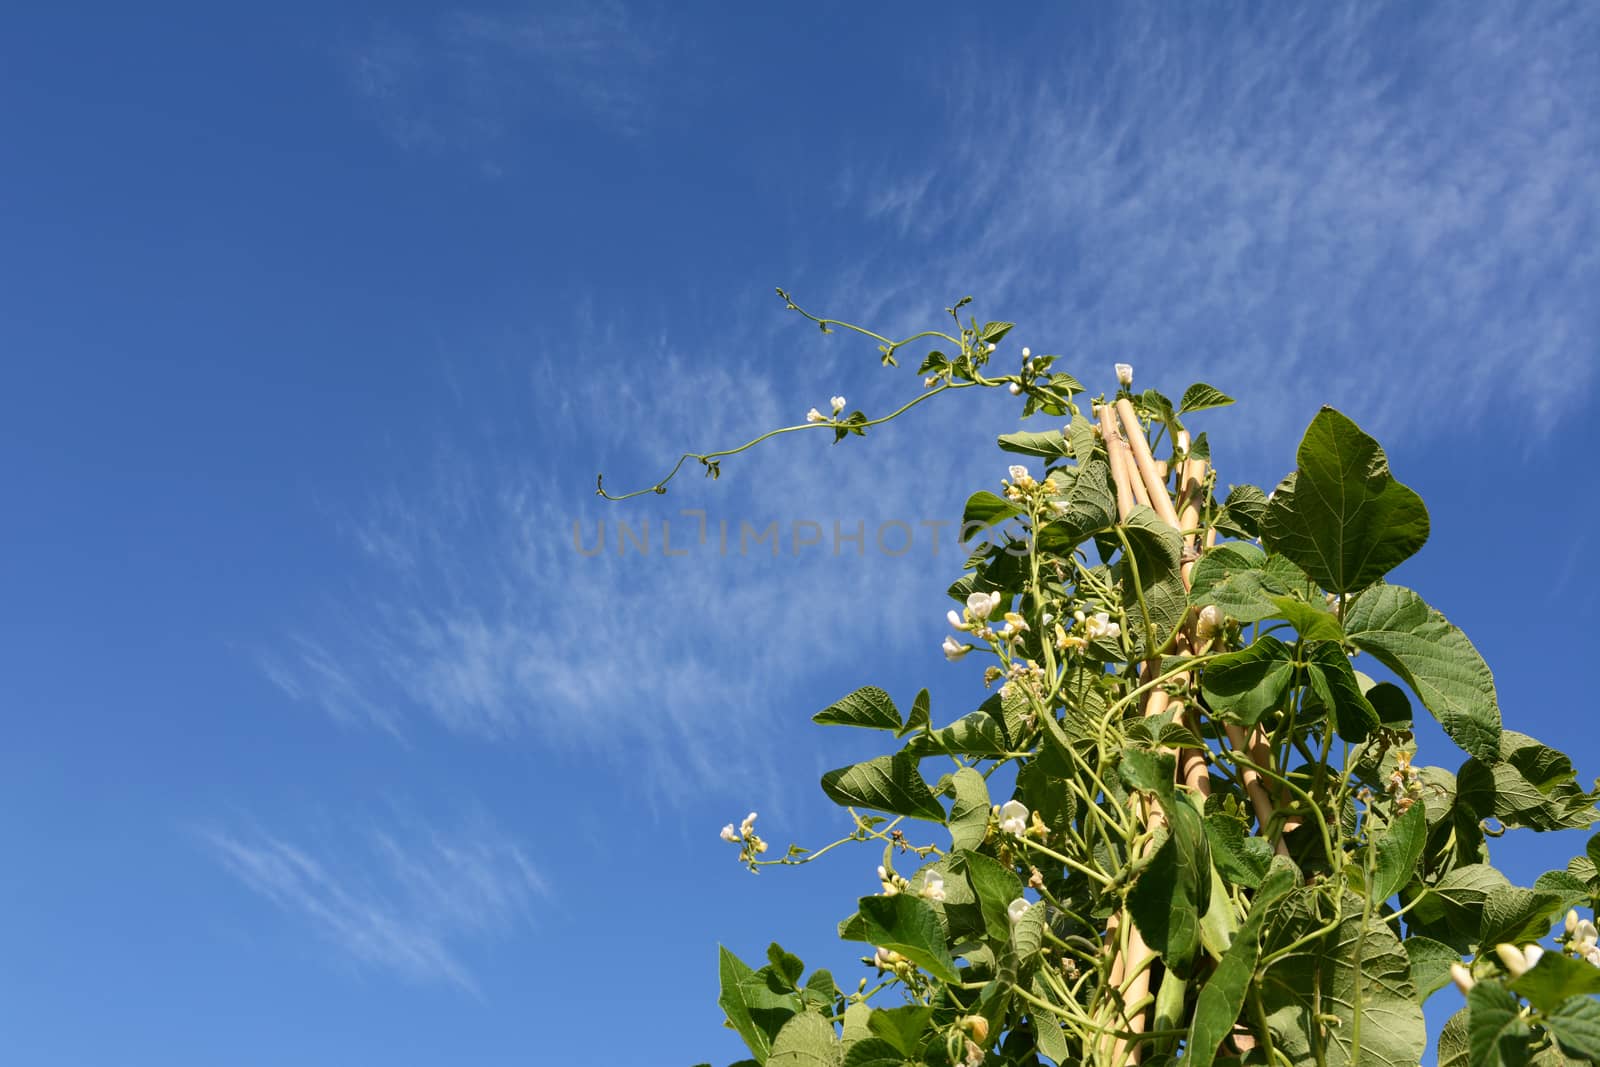 Tall wigwam of Wey runner bean vines with white flowers. Long tendril reaching out against blue summer sky.